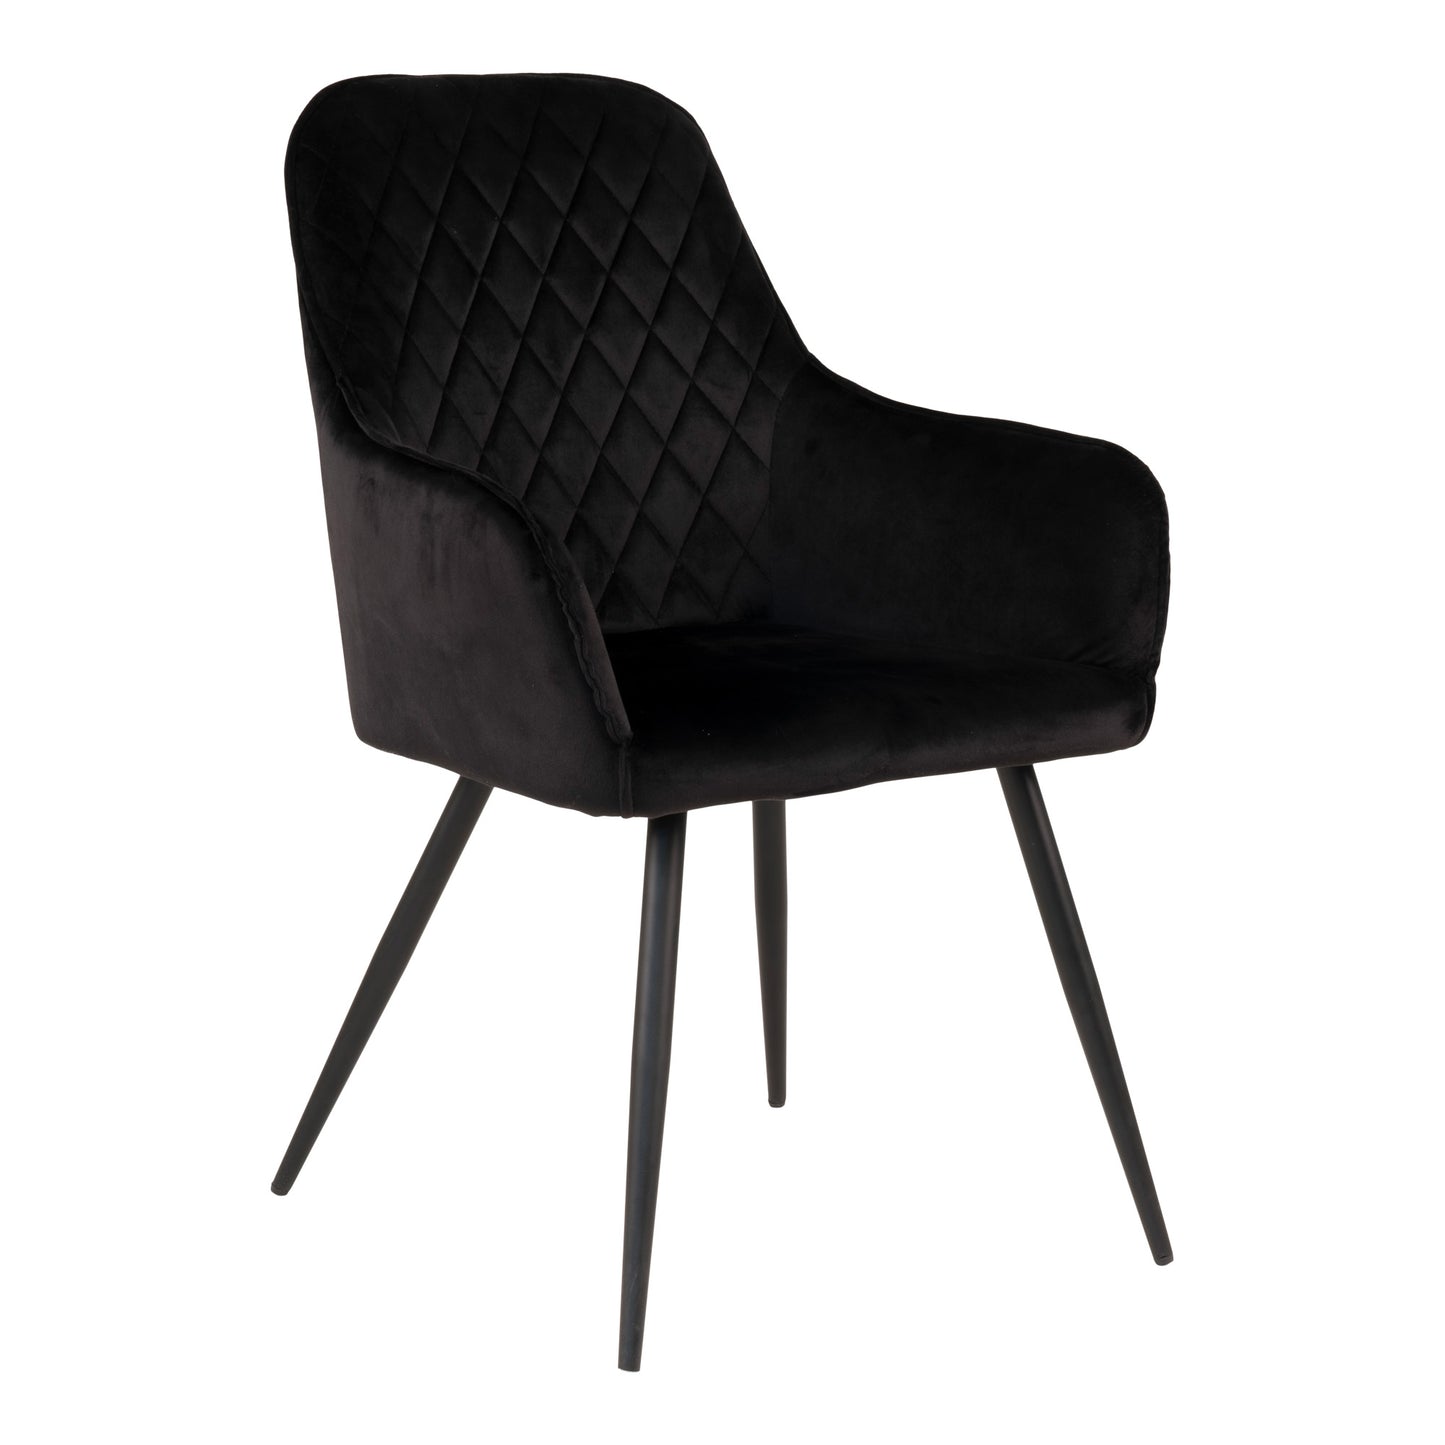 House Nordic - Harbo Dining table chair, Chair in black velour